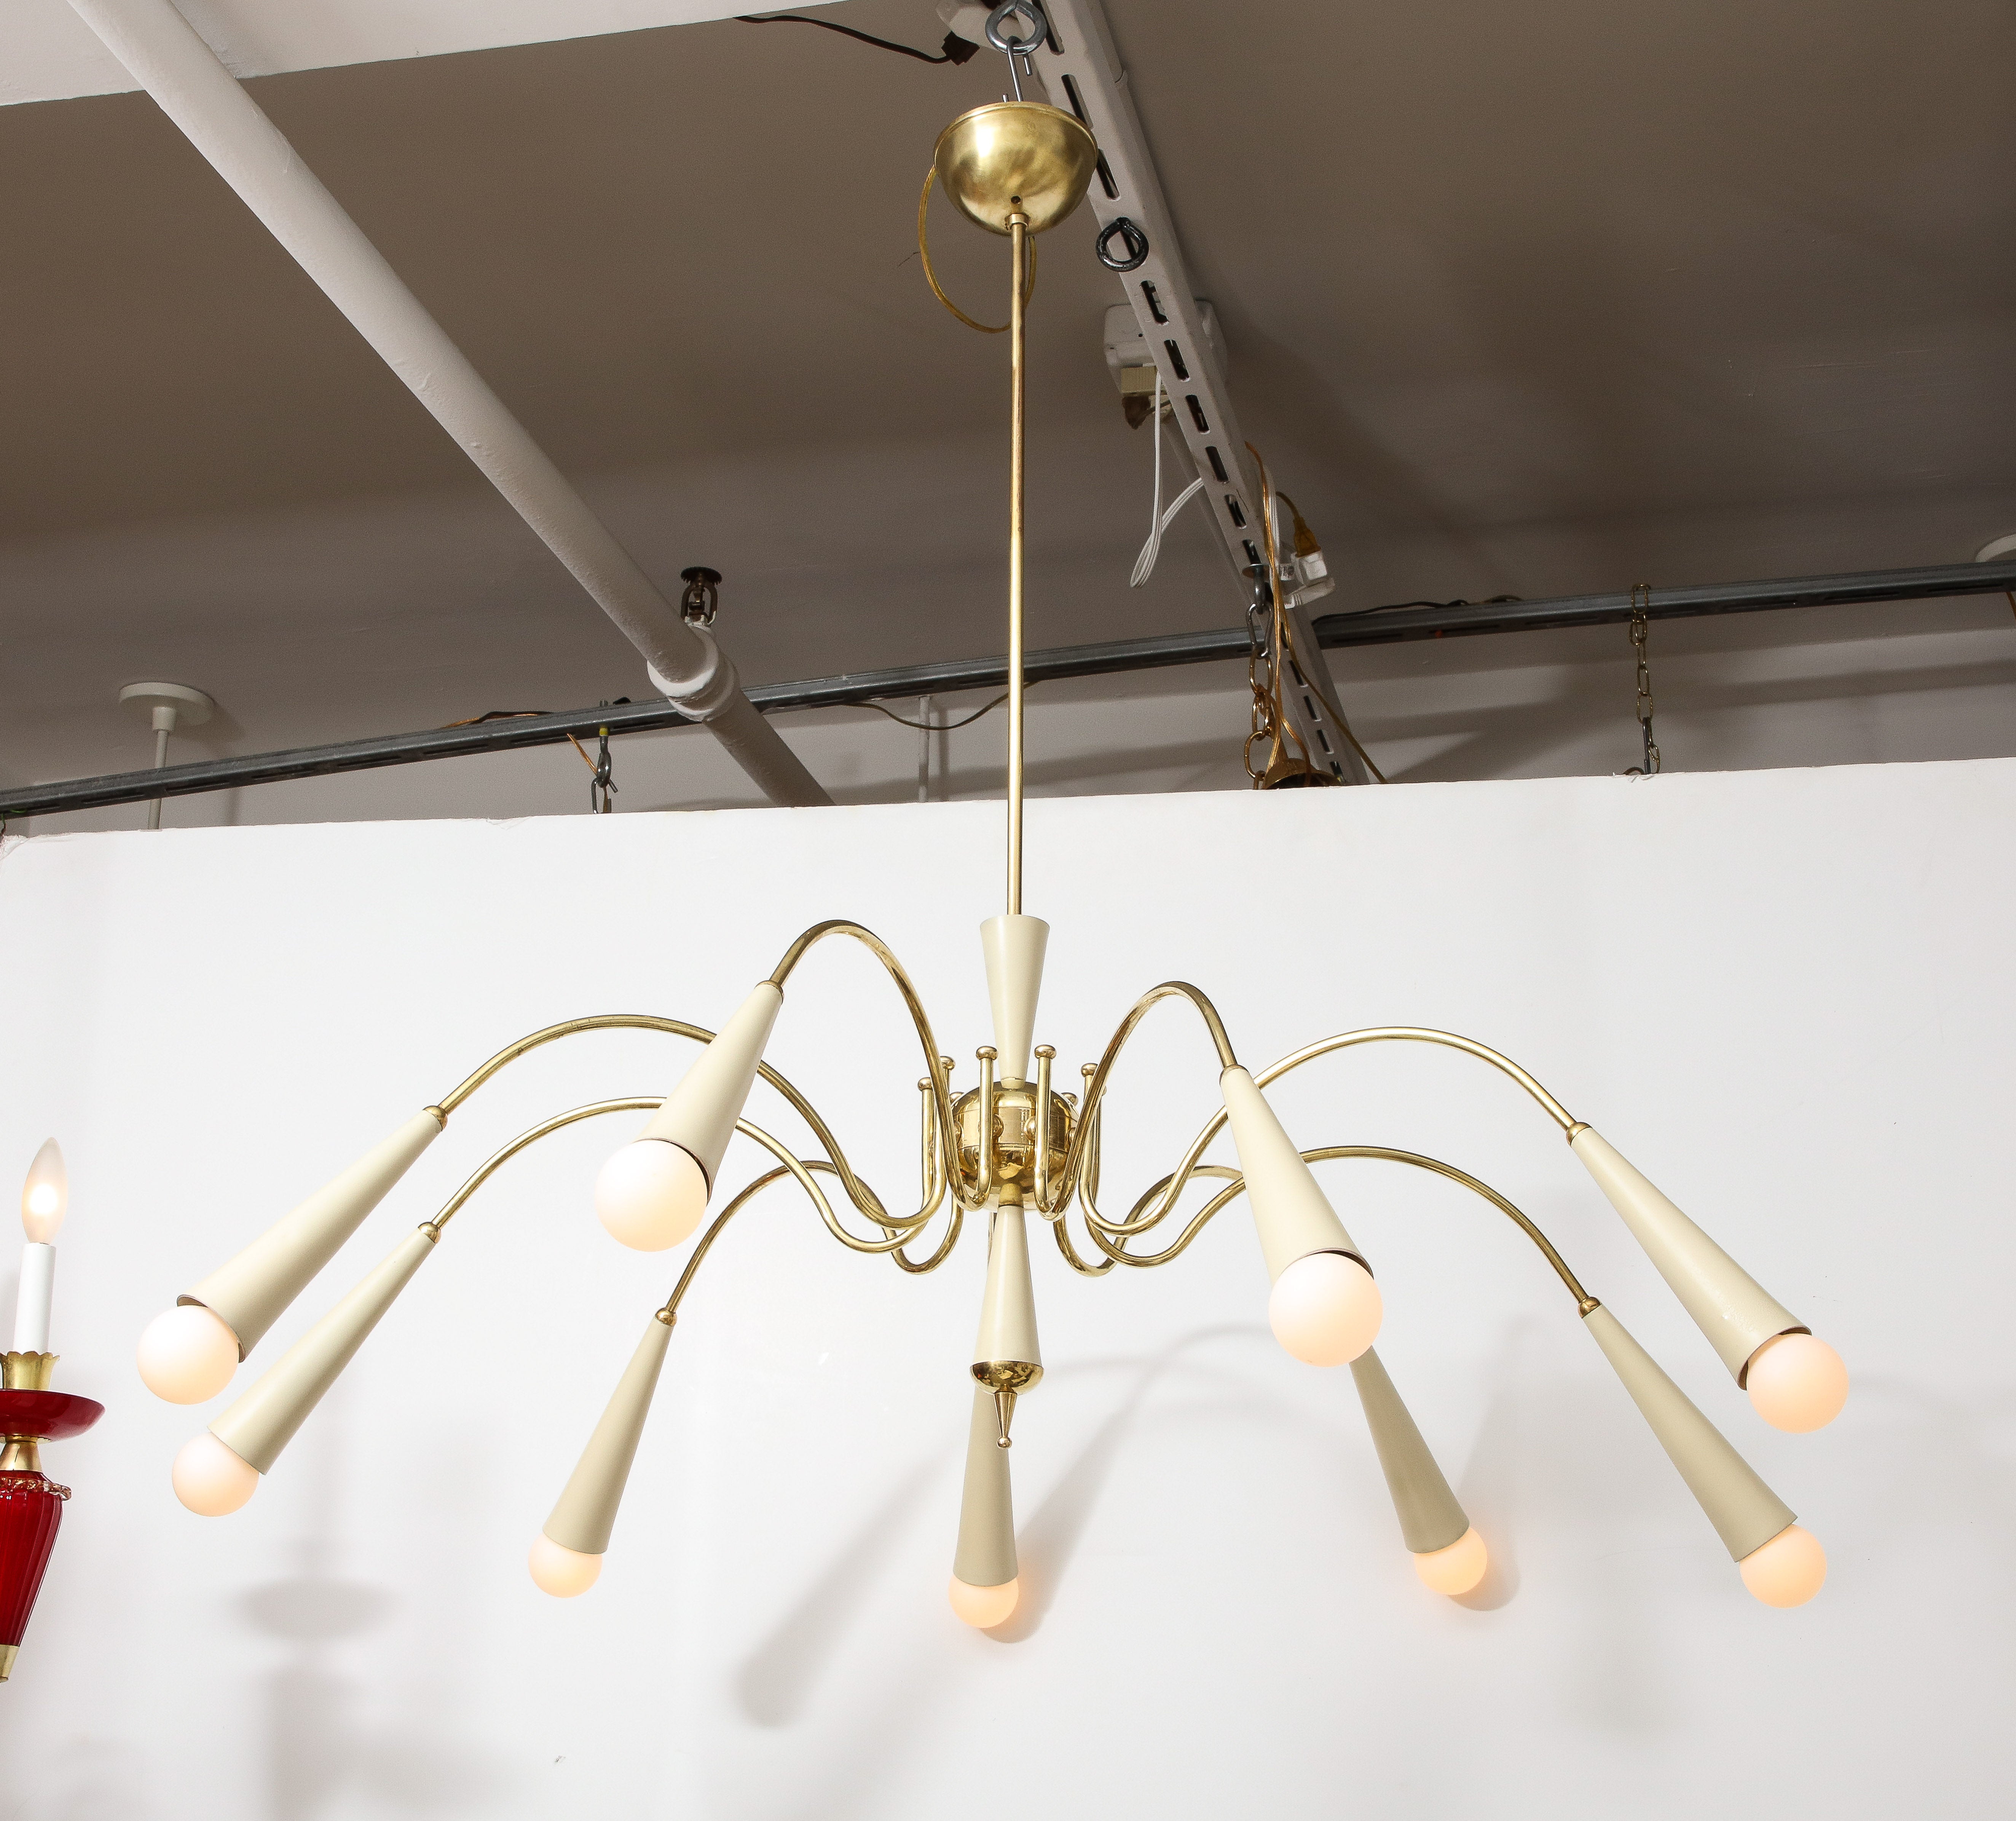 Italian modernist spider nine-arm chandelier in patinated brass and ivory white lacquer; the central brass fitting support the scrolled brass sweeping arms terminating with creamy lacquered enamel conical shaped bulb holders. With conical shaped